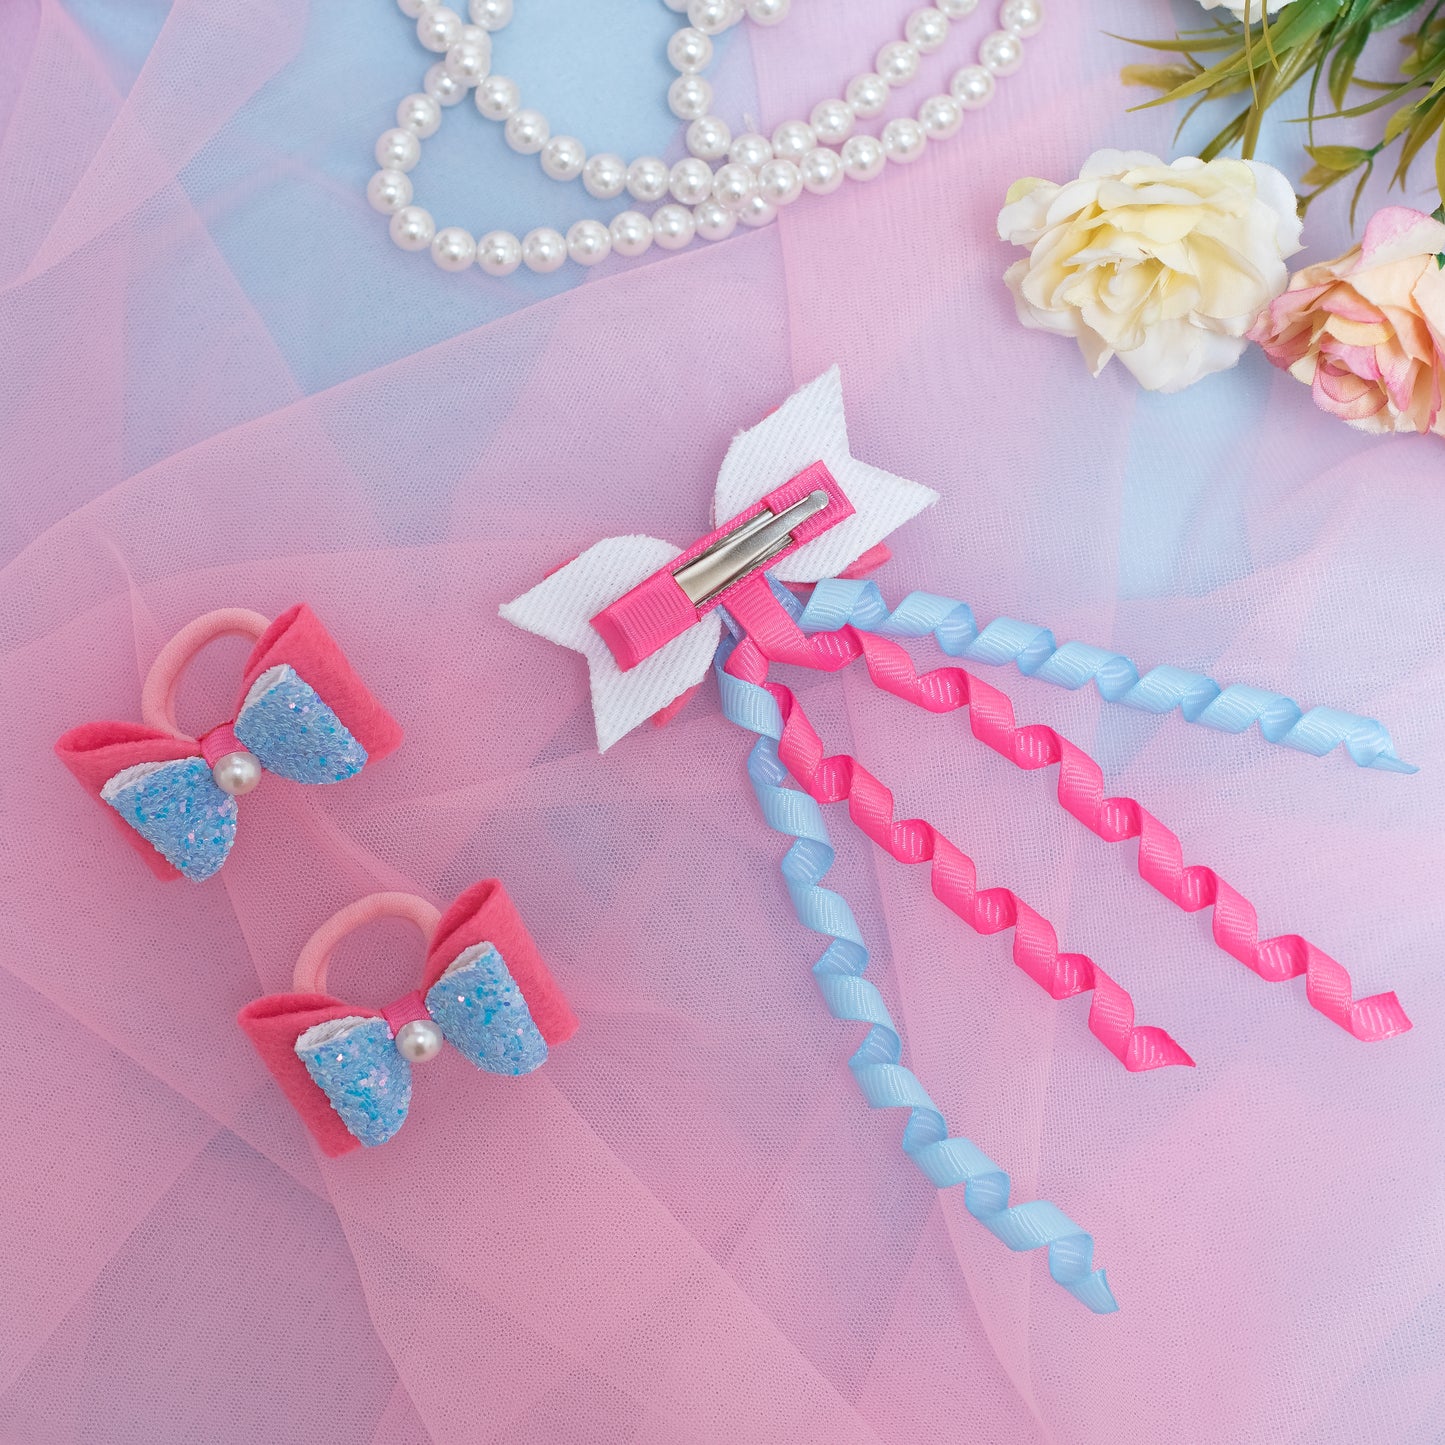 Combo: 1 Dangler Hair-pin and 2 Rubberbands with Fancy Shimmer Bow for Party -  Blue, Pink